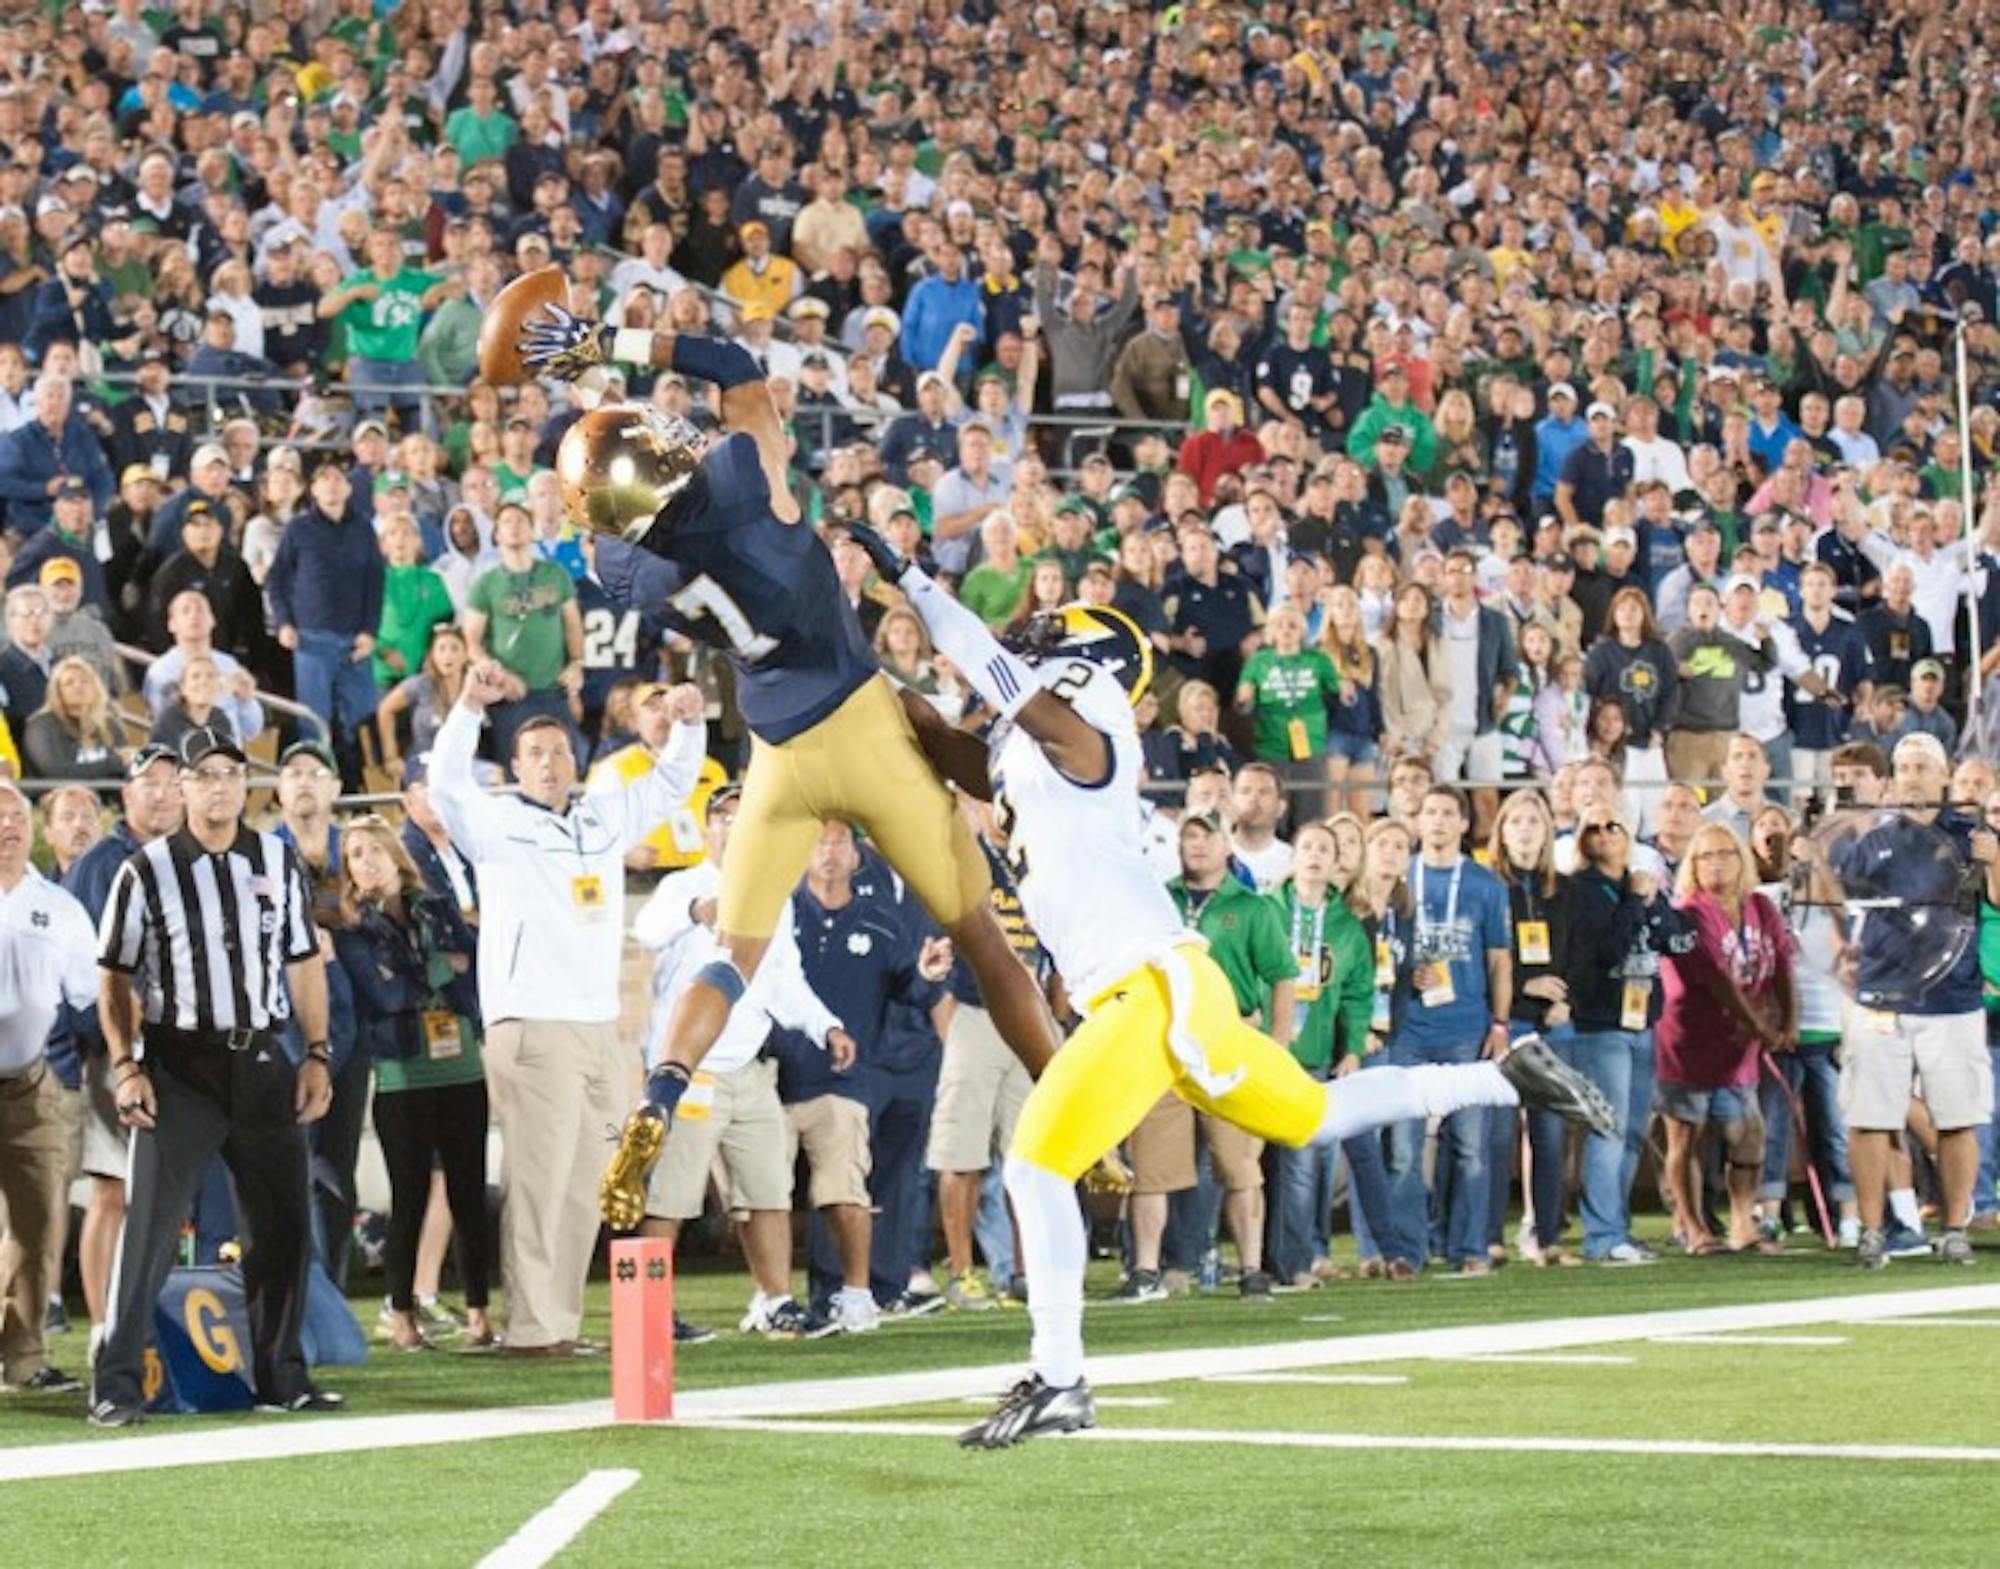 Former Irish receiver Will Fuller leaps to haul in a touchdown pass from former quarterback Everett Golson during Notre Dame’s 31-0 win over Michigan on Sept. 6, 2014 at Notre Dame Stadium.